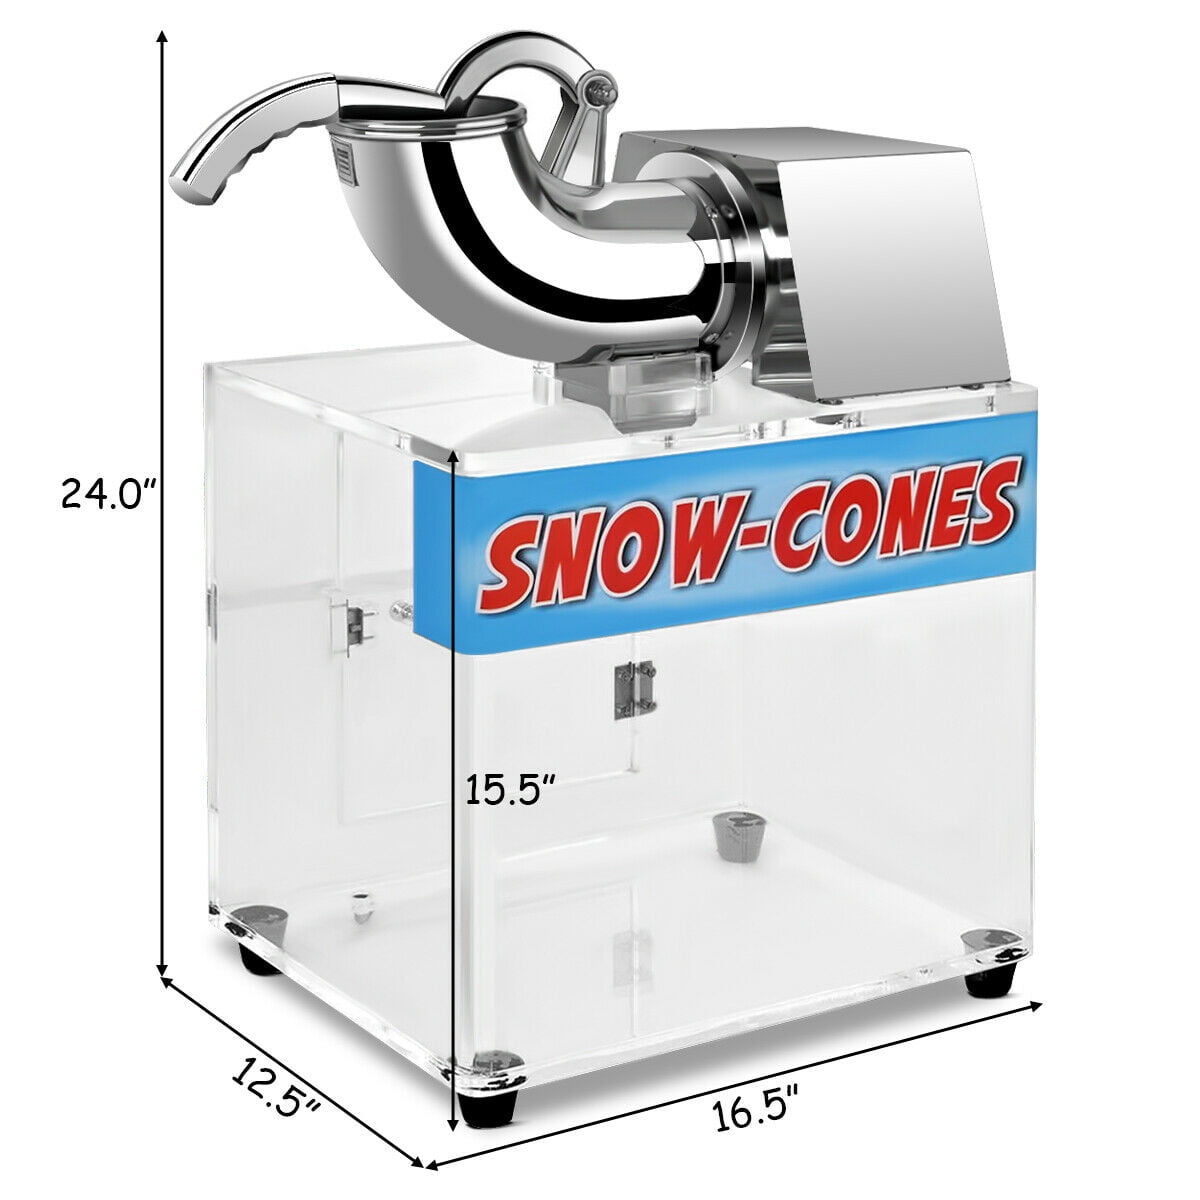 Stainless Steel Electric Snow Cone Machine Ice Shaver Crusher Shaved Shaving Maker w/Acrylic Case for Home Vendors Fast-food Stores Snack Bars Cafes School Canteens Restaurants Carnivals Banquets 